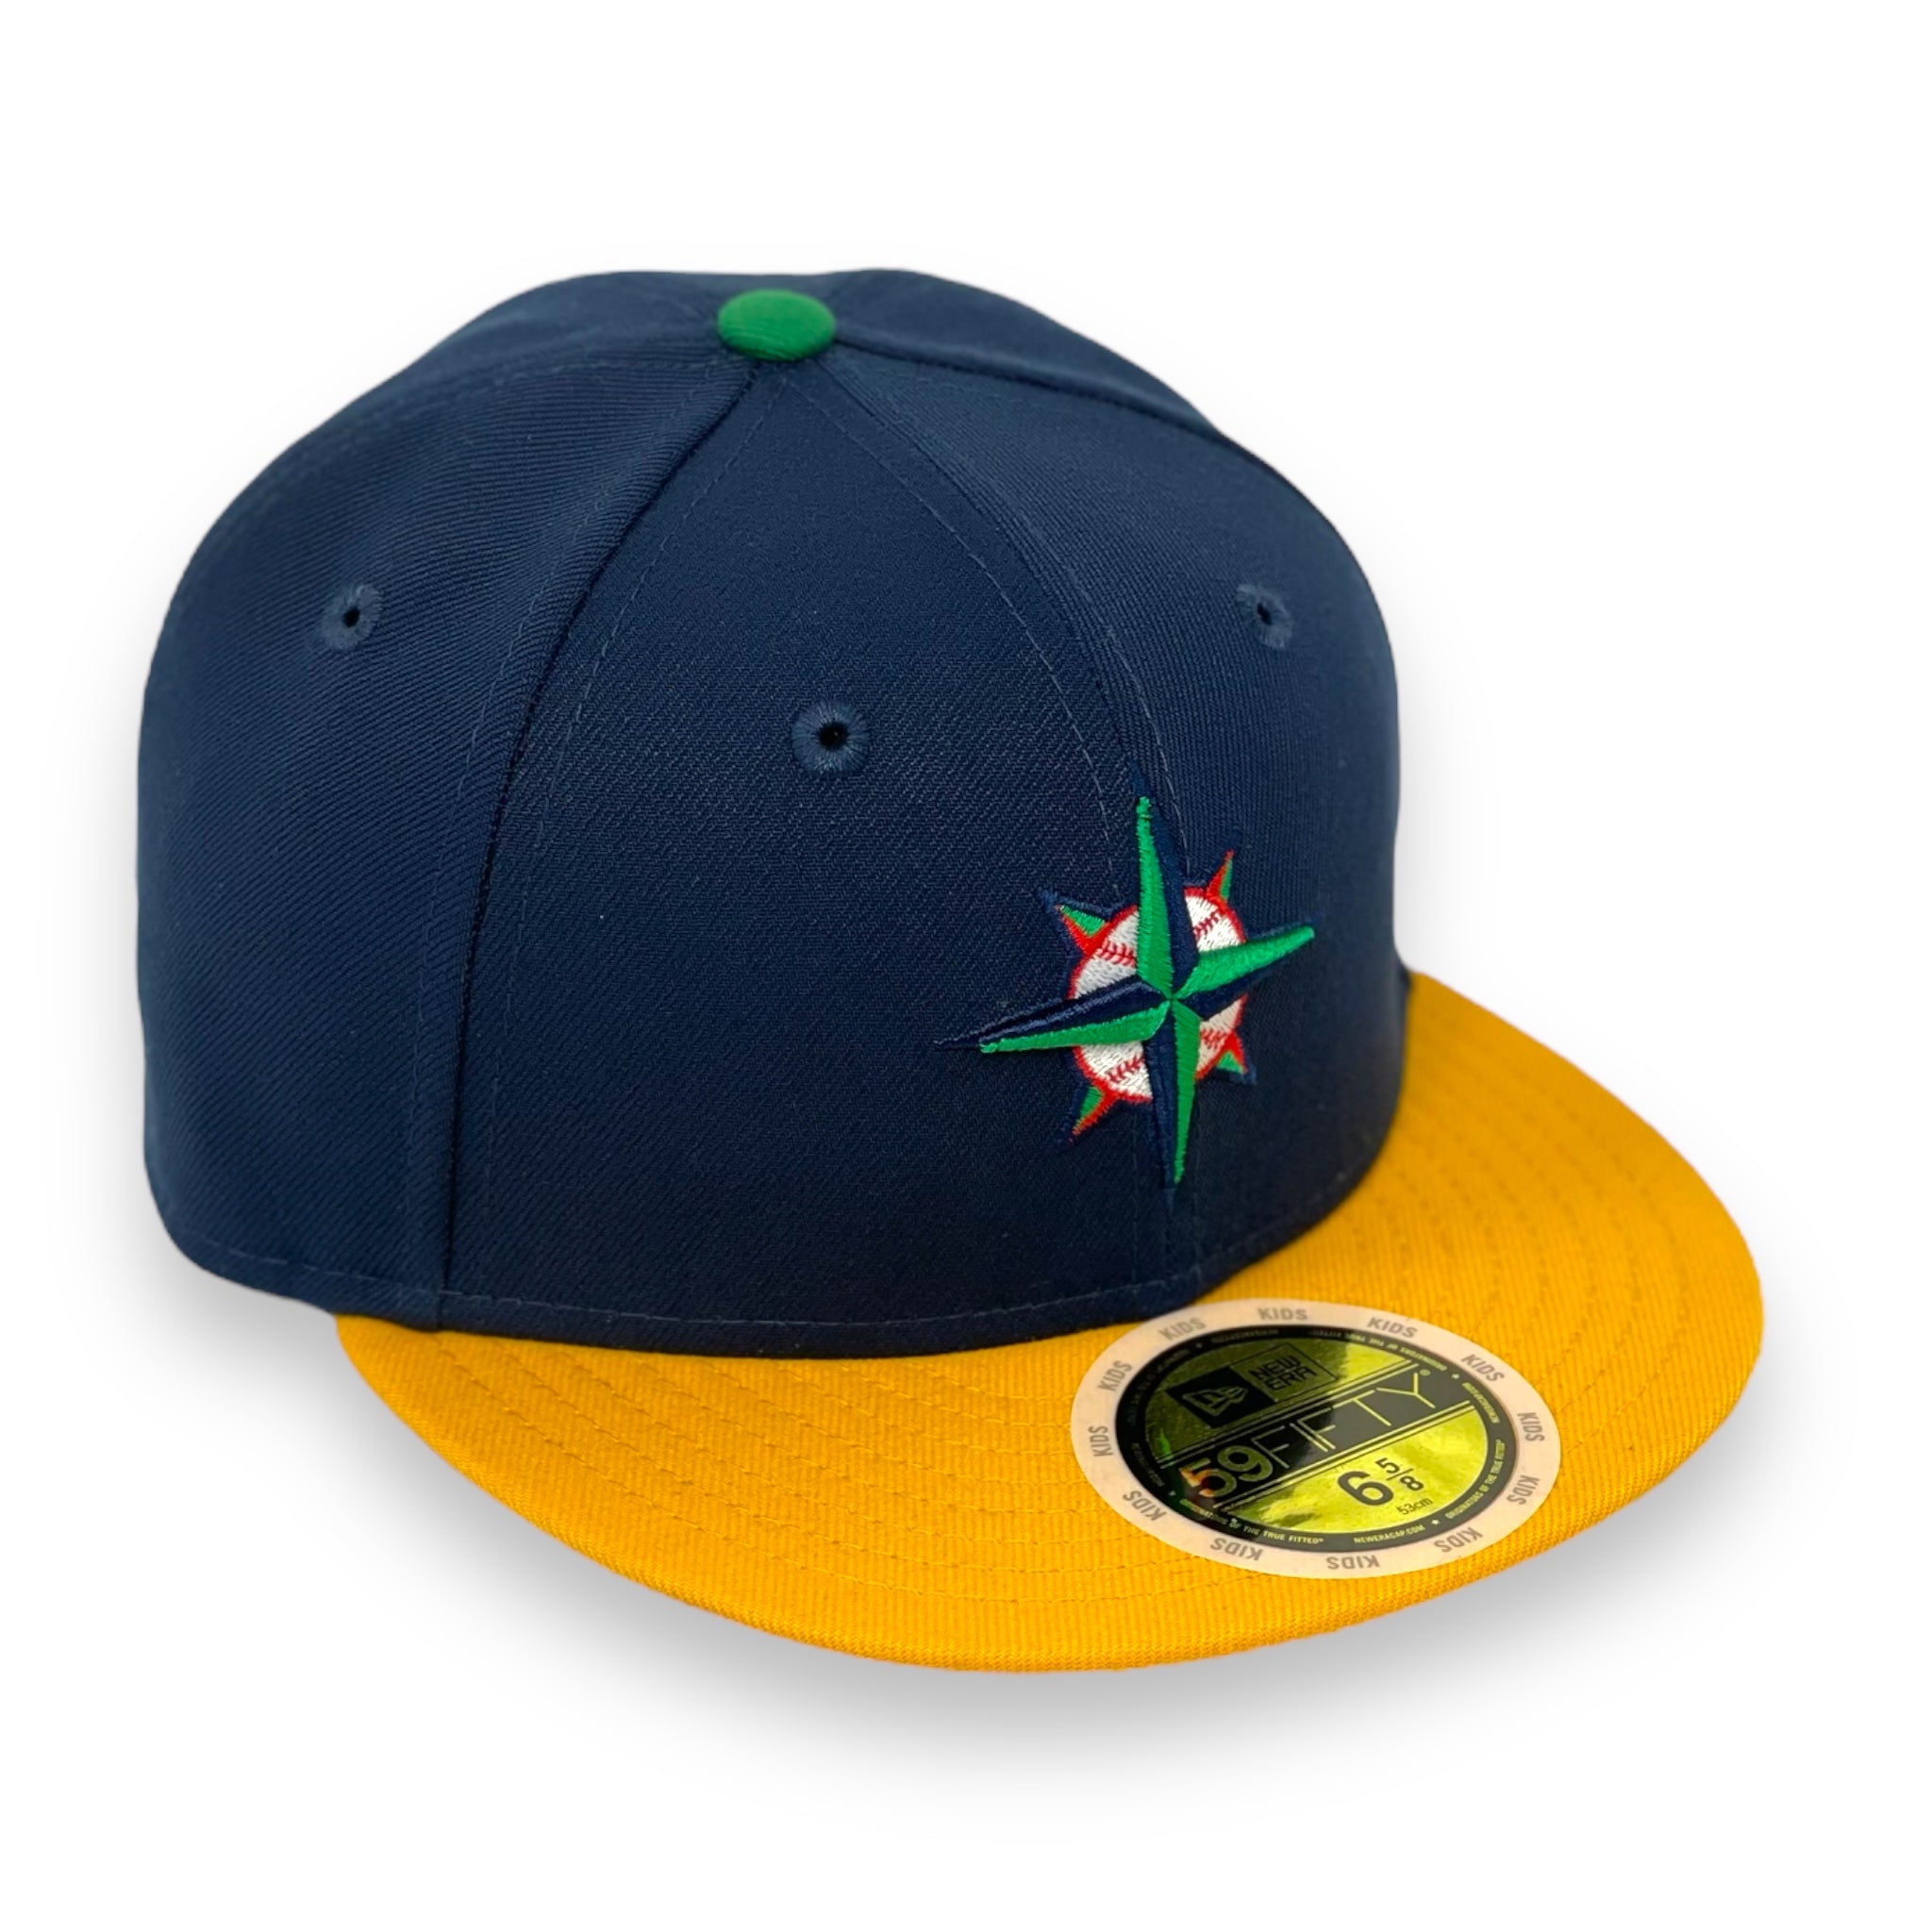 KIDS - SEATTLE MARINERS (NAVY) NEW ERA 59FIFTY FITTED (GREEN UNDER VISOR)